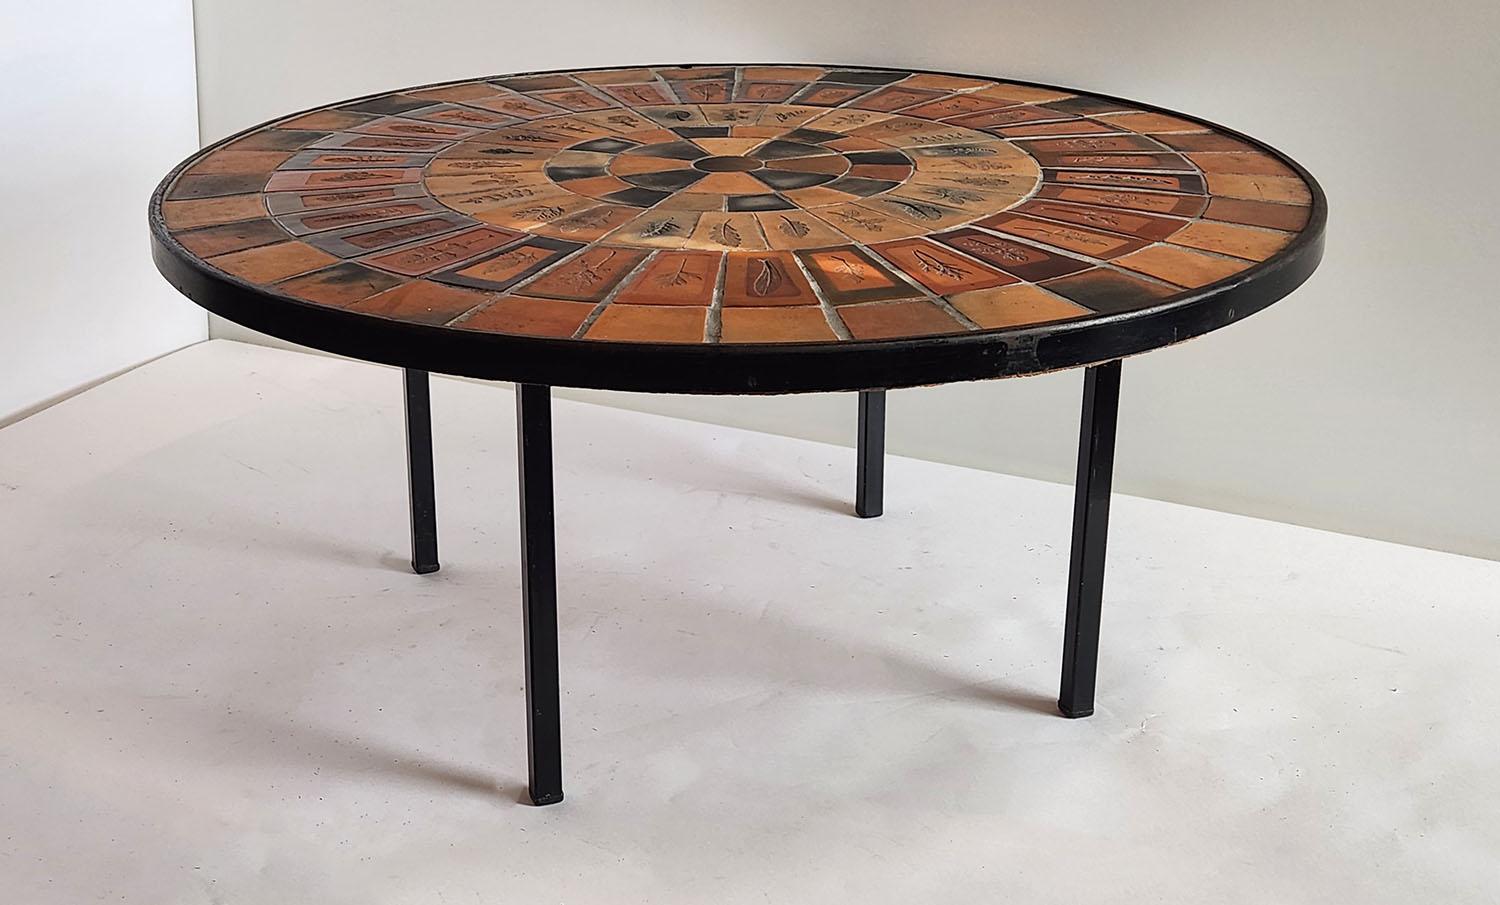 Round coffee table with the famous Roger Capron Herbier tiles, designed  from 1968 to 1982.

The handcrafted Herbier tiles were a subset of the Garrigue tiles produced by a technique in which real leaves were pressed into the clay and, during